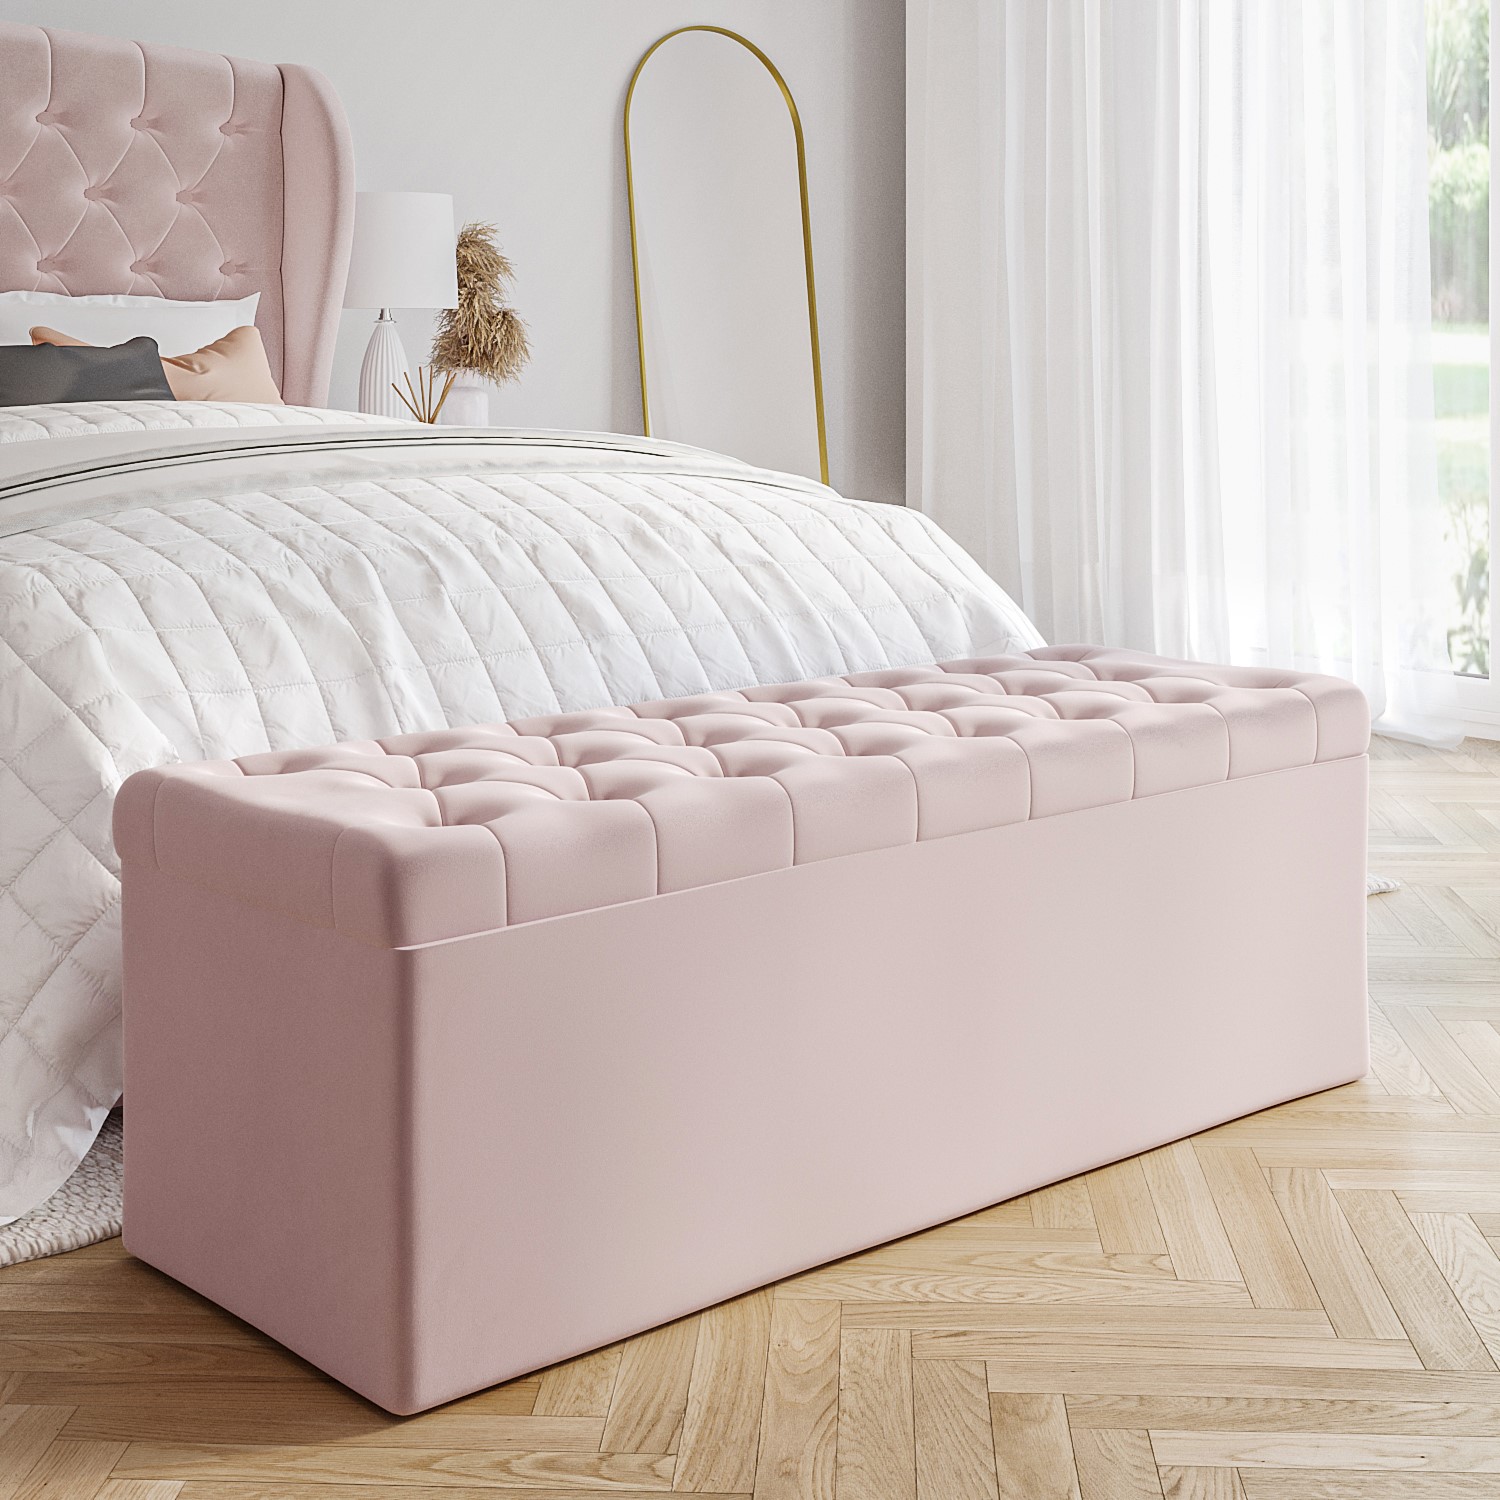 Read more about Pink velvet double ottoman bed with matching blanket box safina